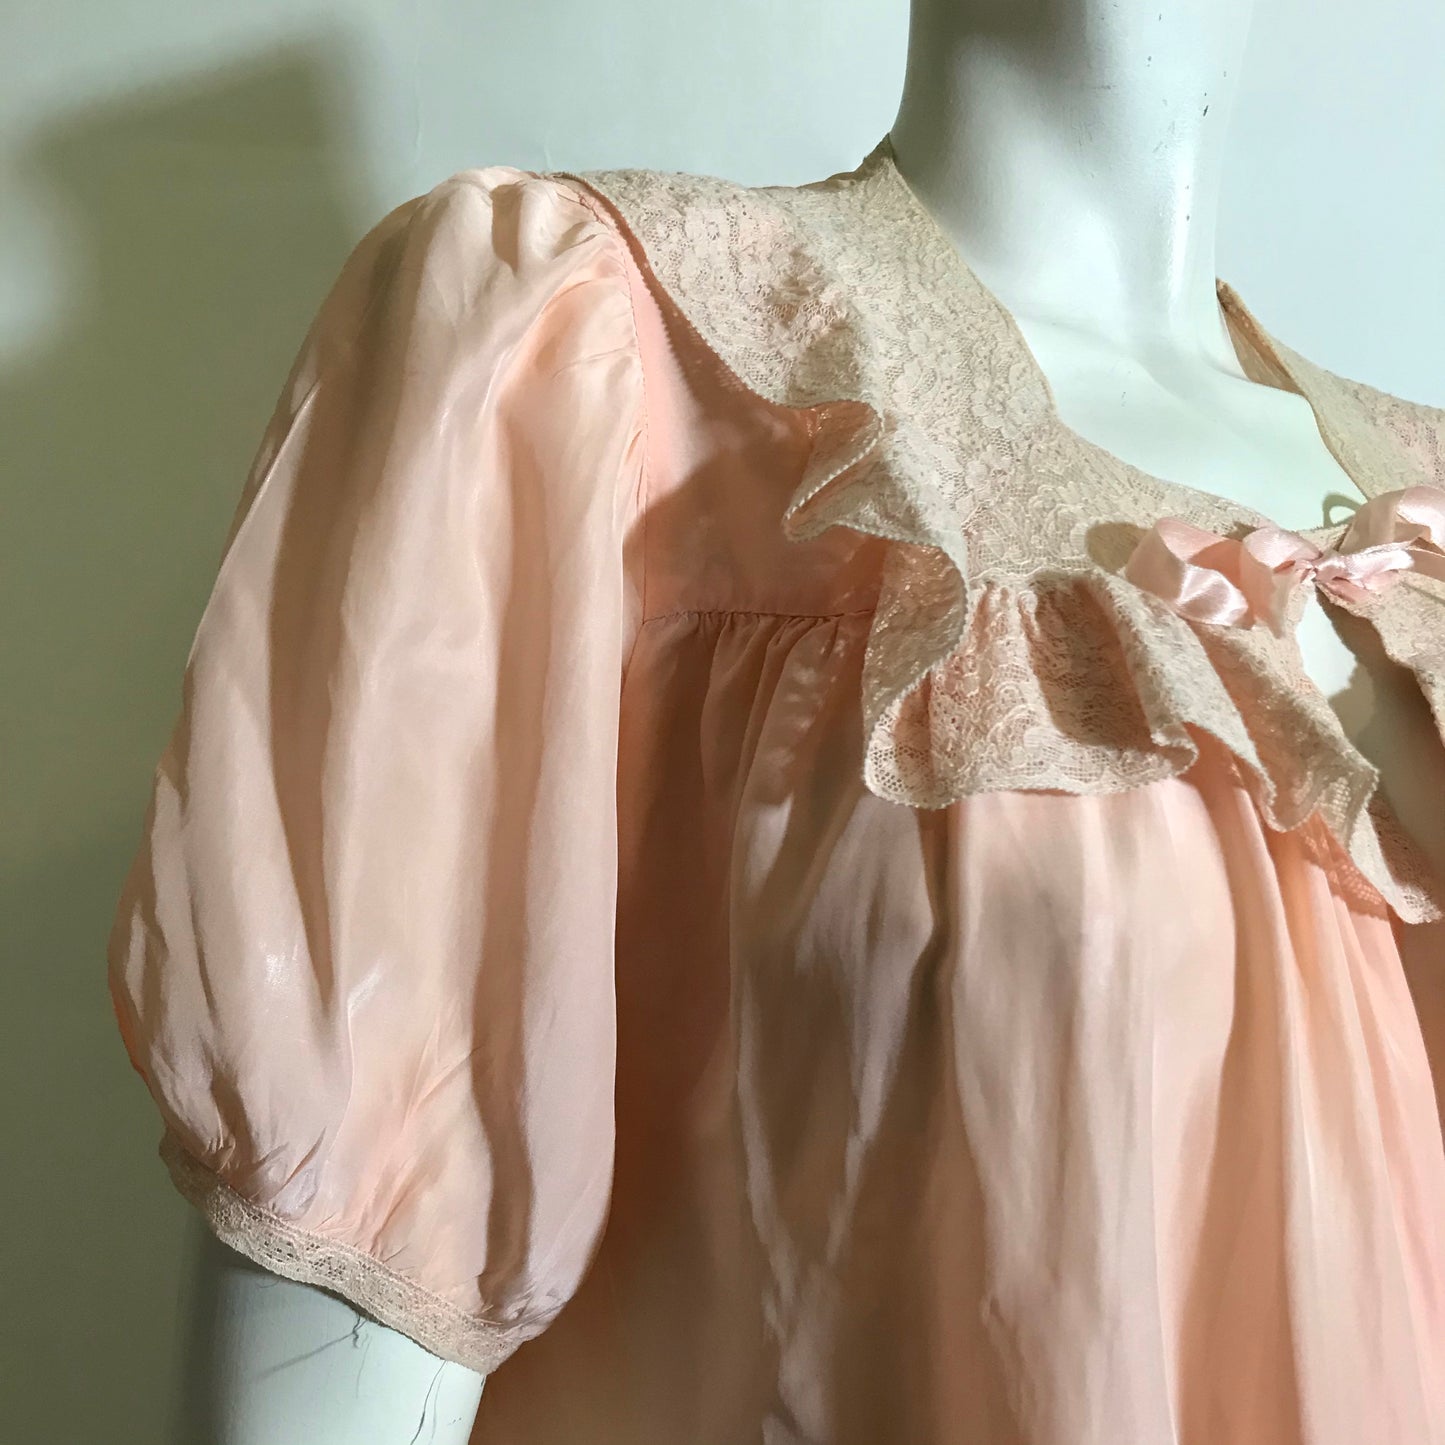 Pale Peach Rayon Lace Trimmed Bed Jacket with Ribbons circa 1940s